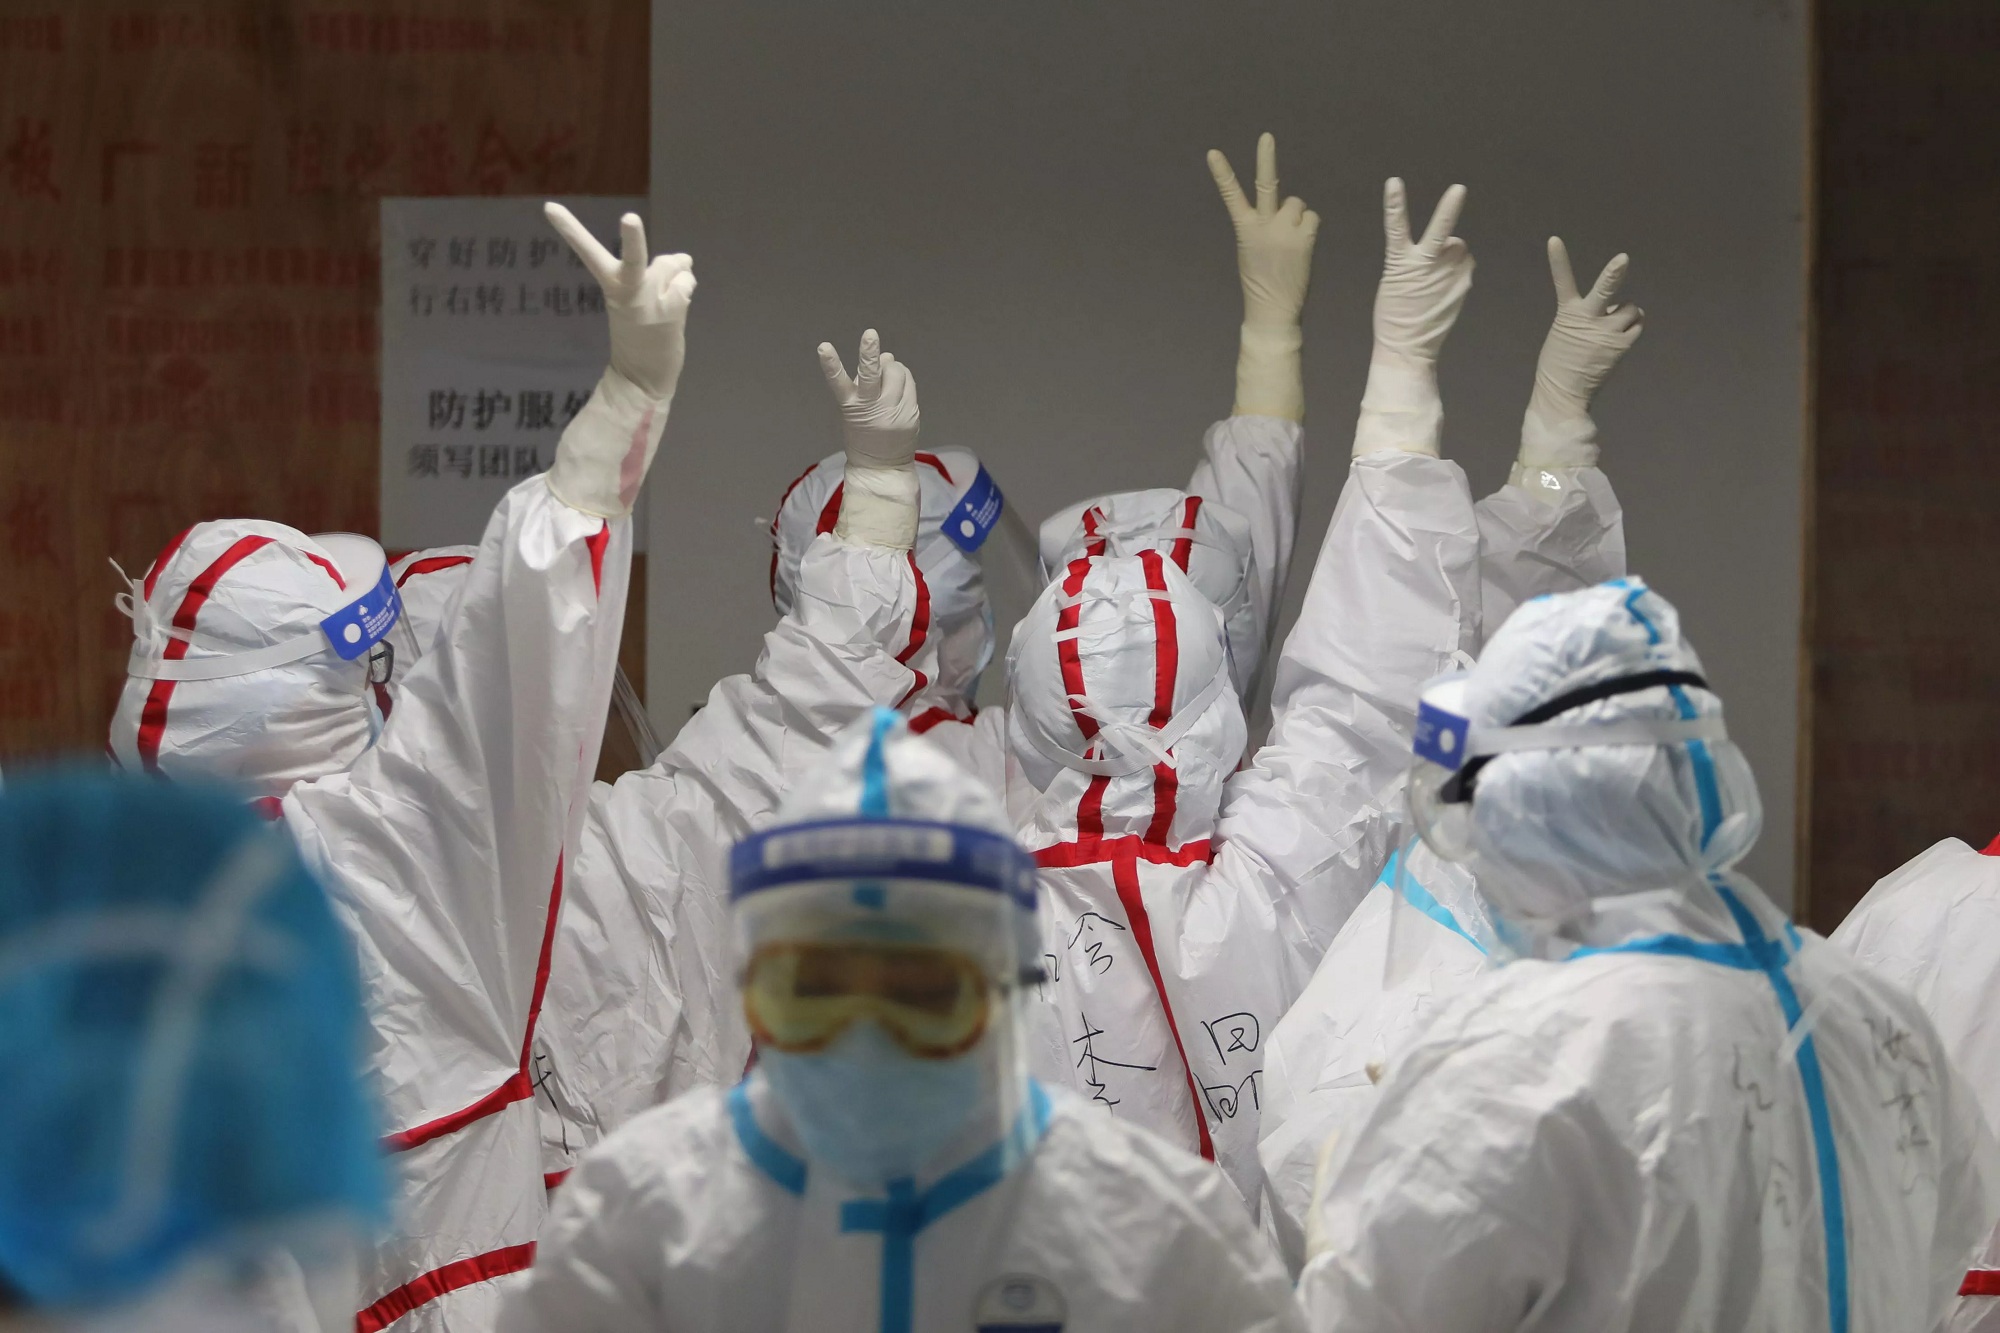 Medical staff cheer before going into an ICU ward for coronavirus patients at the Red Cross Hospital in Wuhan in Chinas central Hubei province on Monday